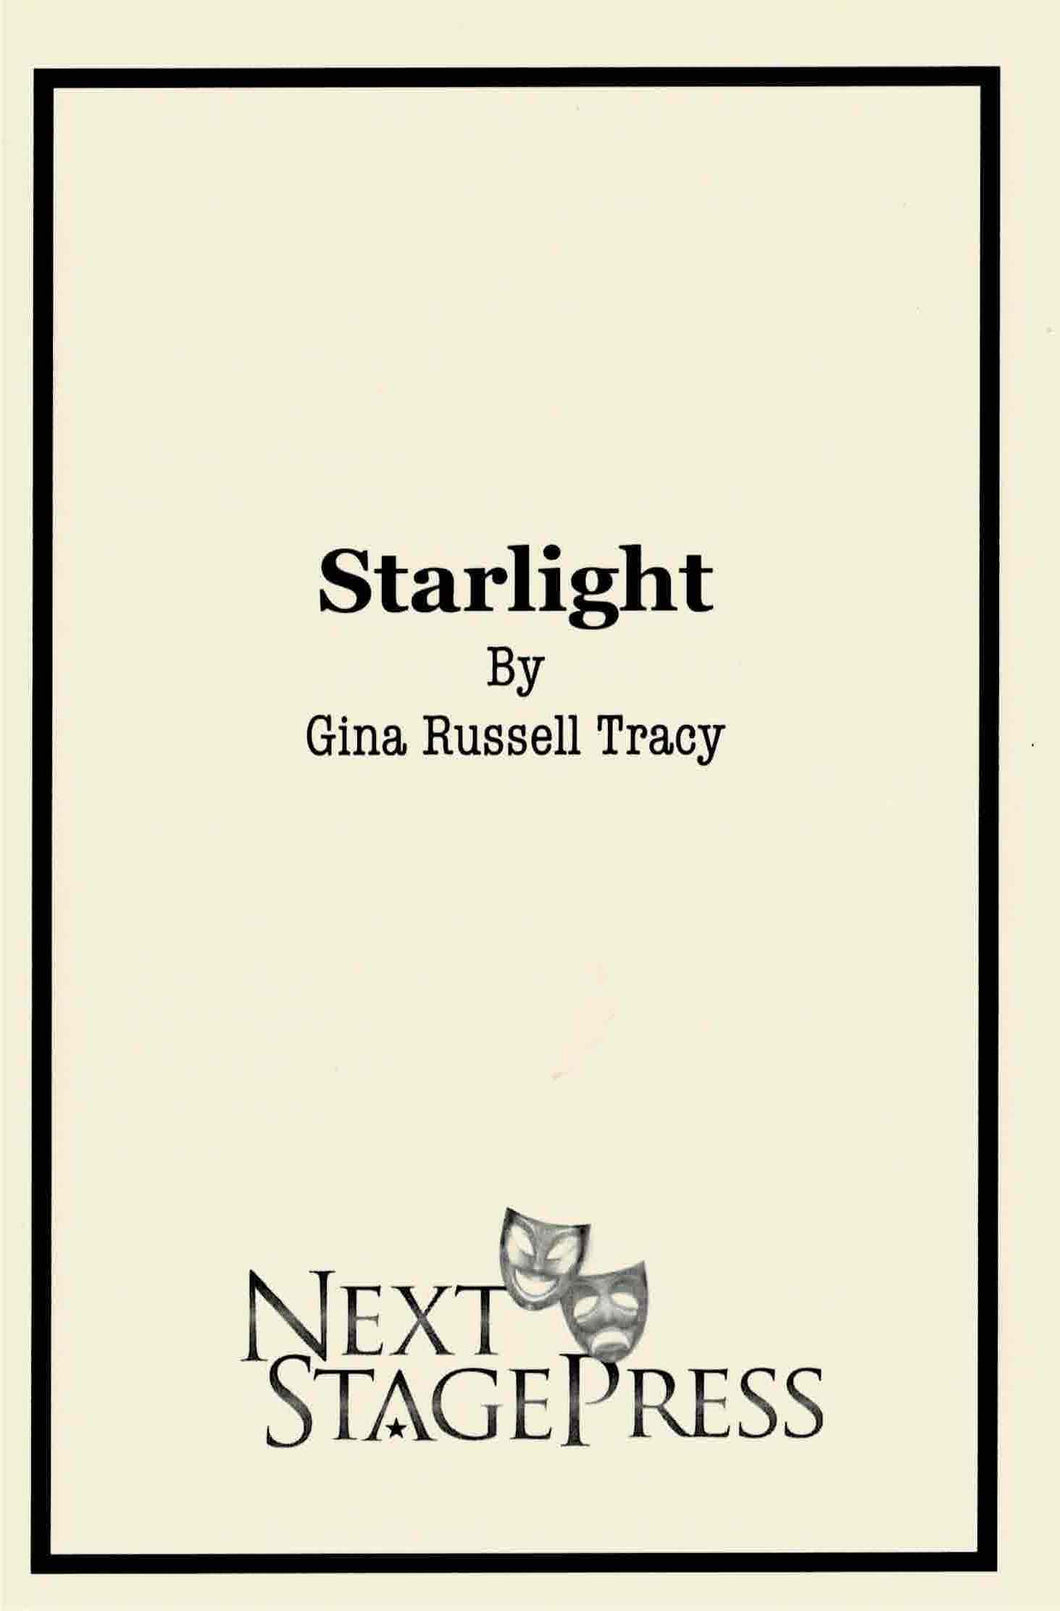 Starlight by Gina Russell Tracy